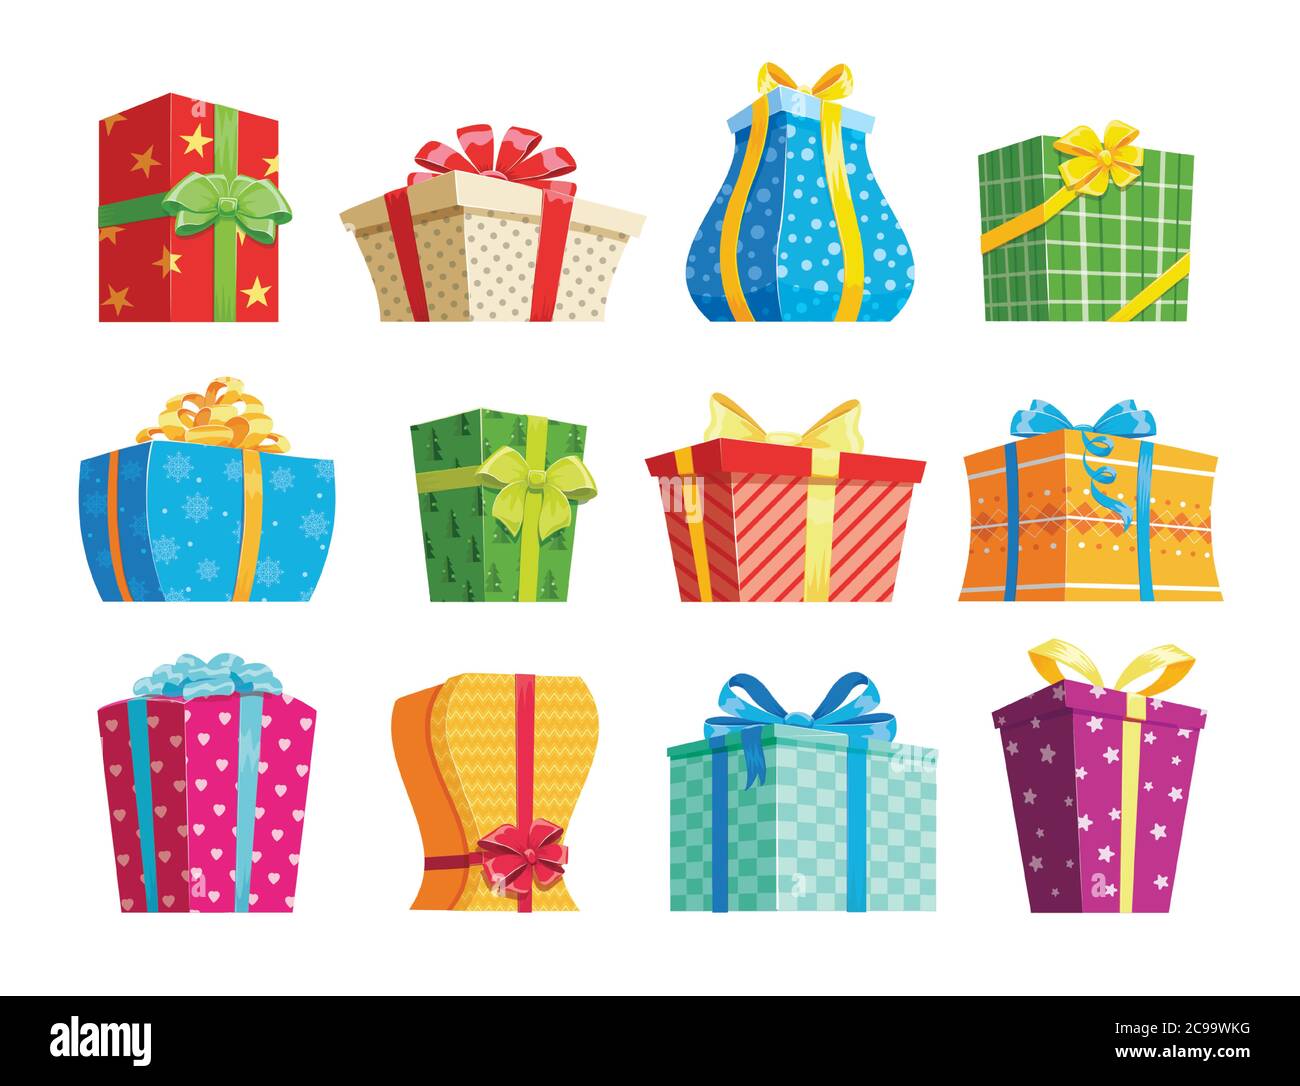 Christmas gifts. Set of colorful cartoon presents, isolated on white background. Vector illustration of cute gift boxes with ribbons. Stock Vector